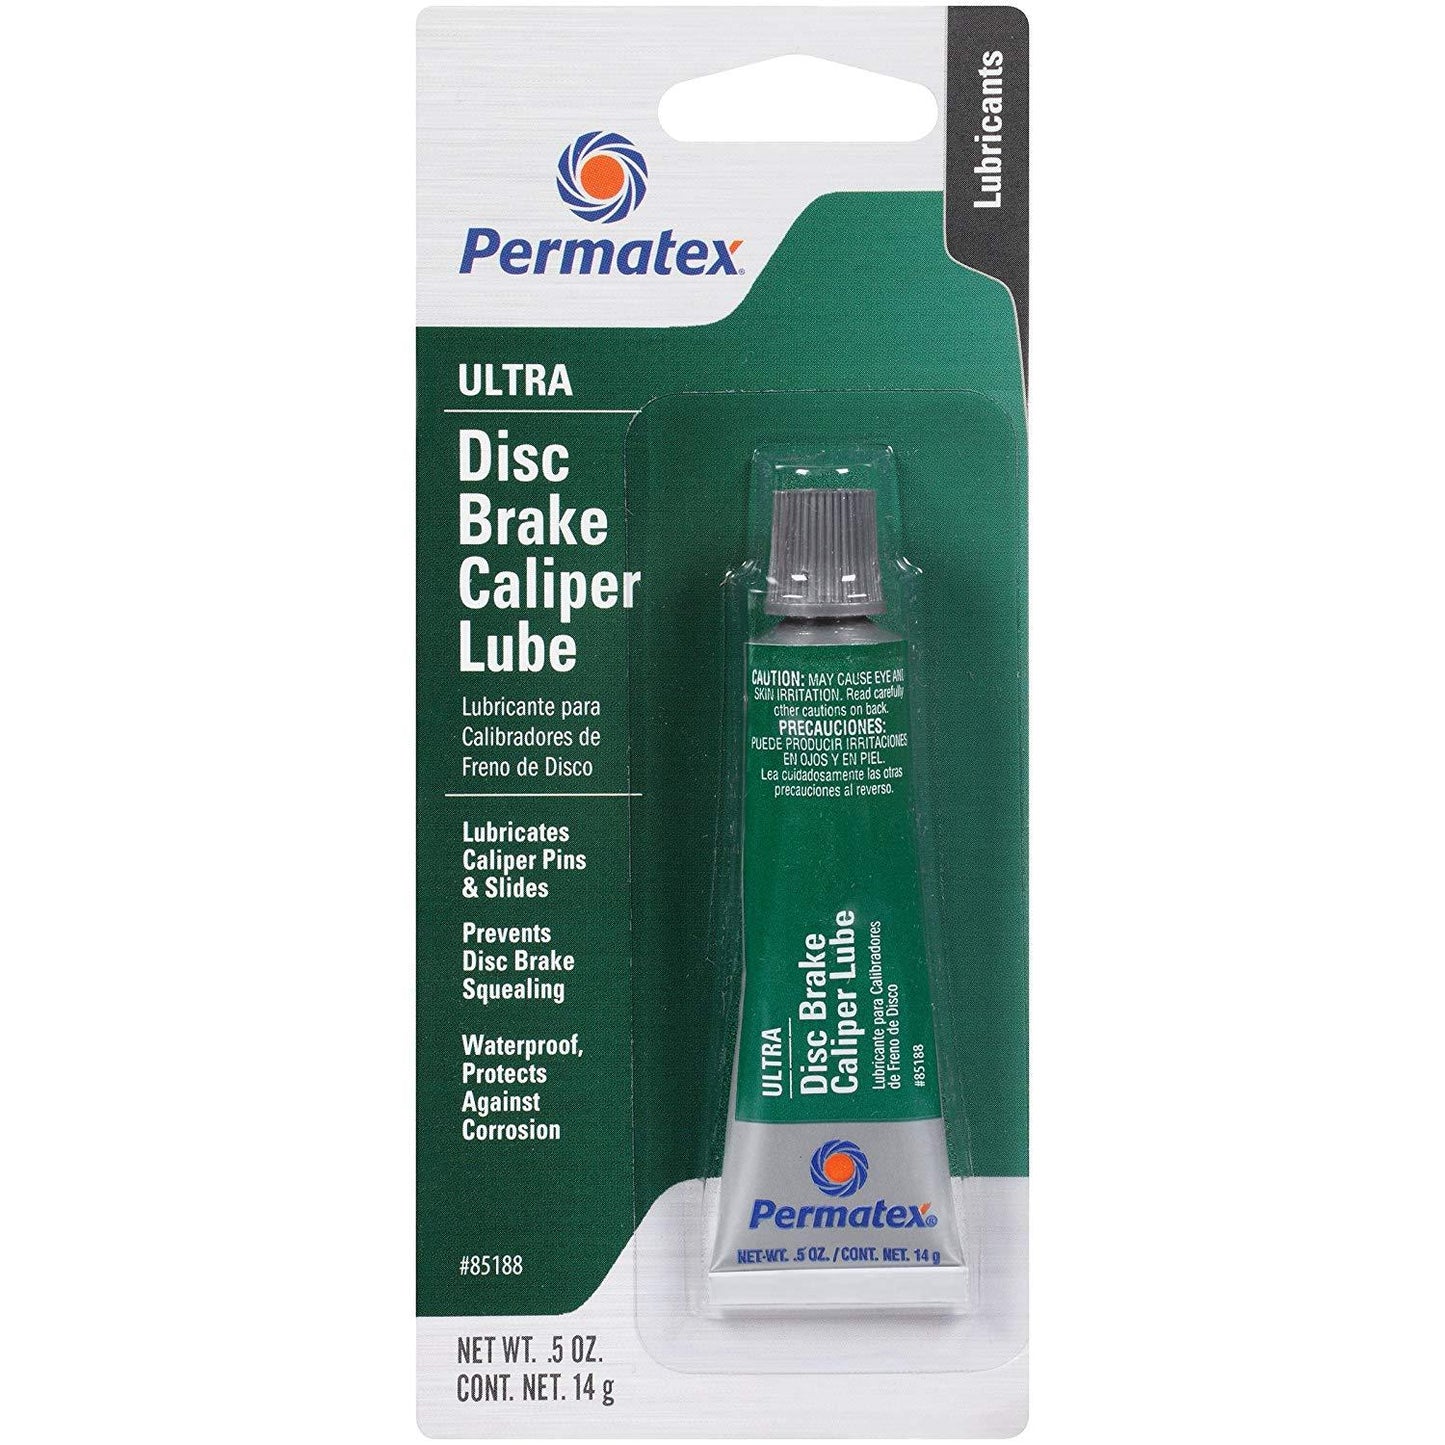 Permatex Synthetic Ultra Disc Brake Caliper Parts Lubricant 14g